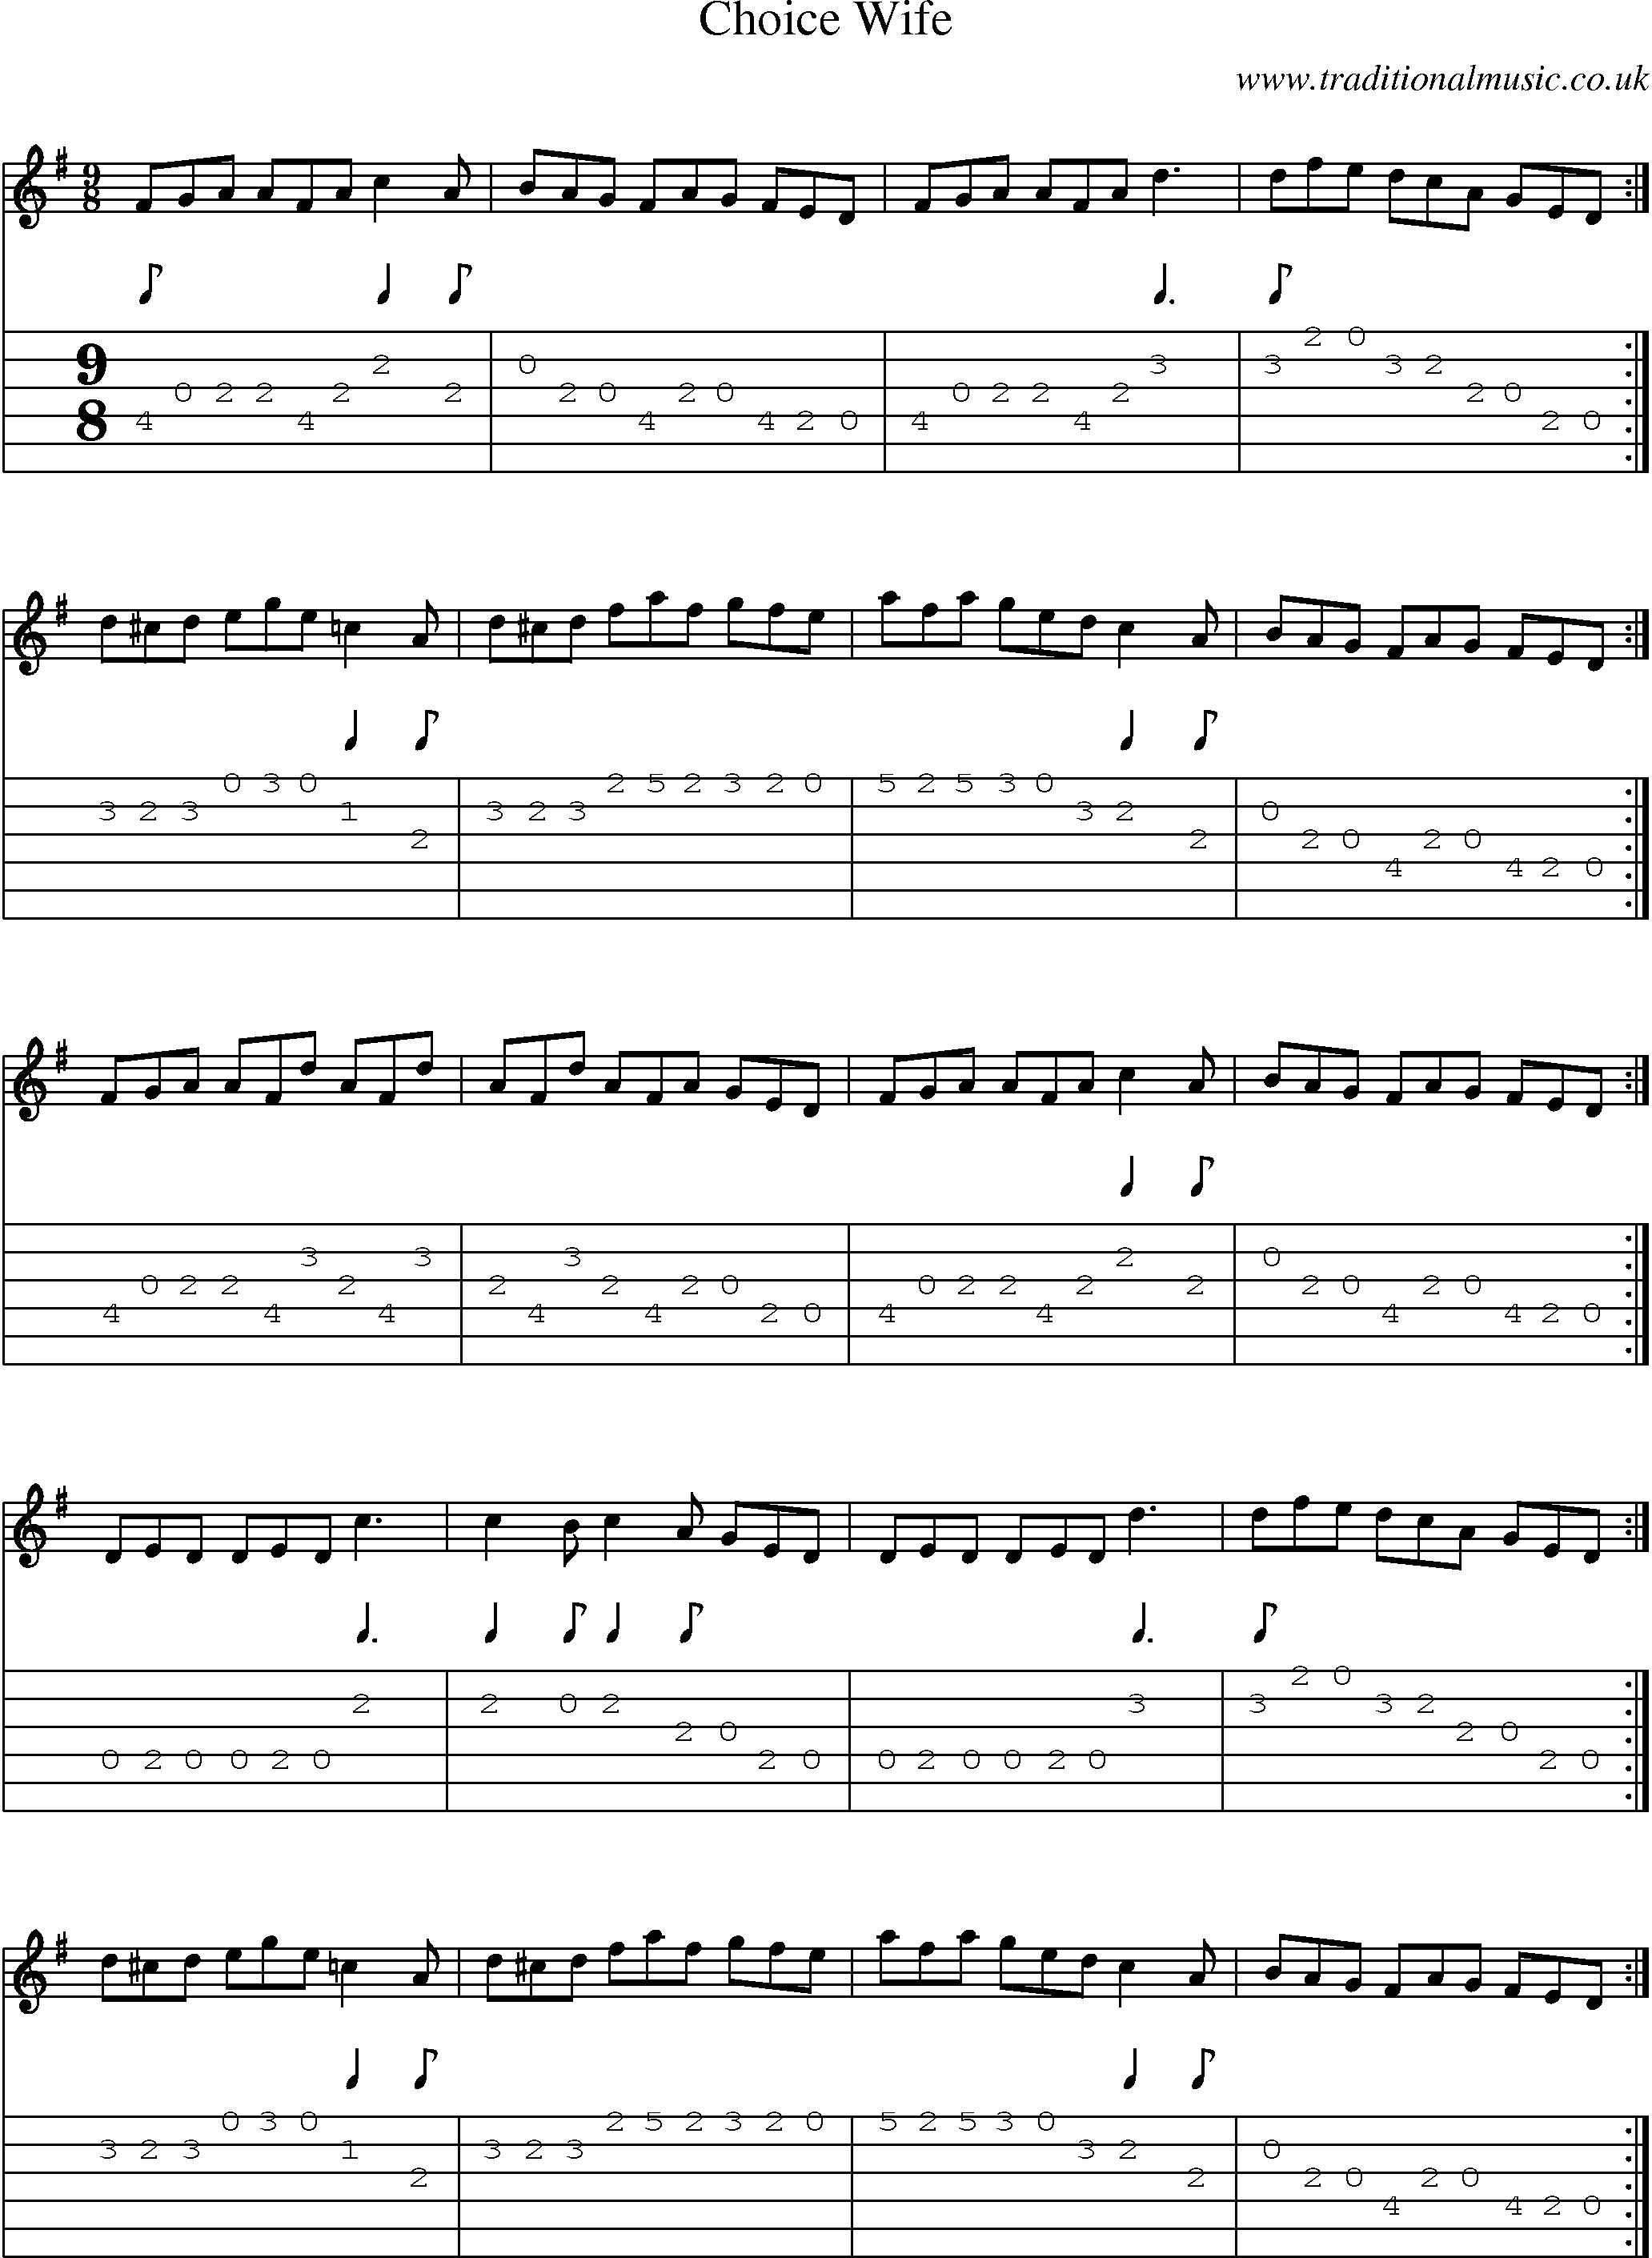 Music Score and Guitar Tabs for Choice Wife